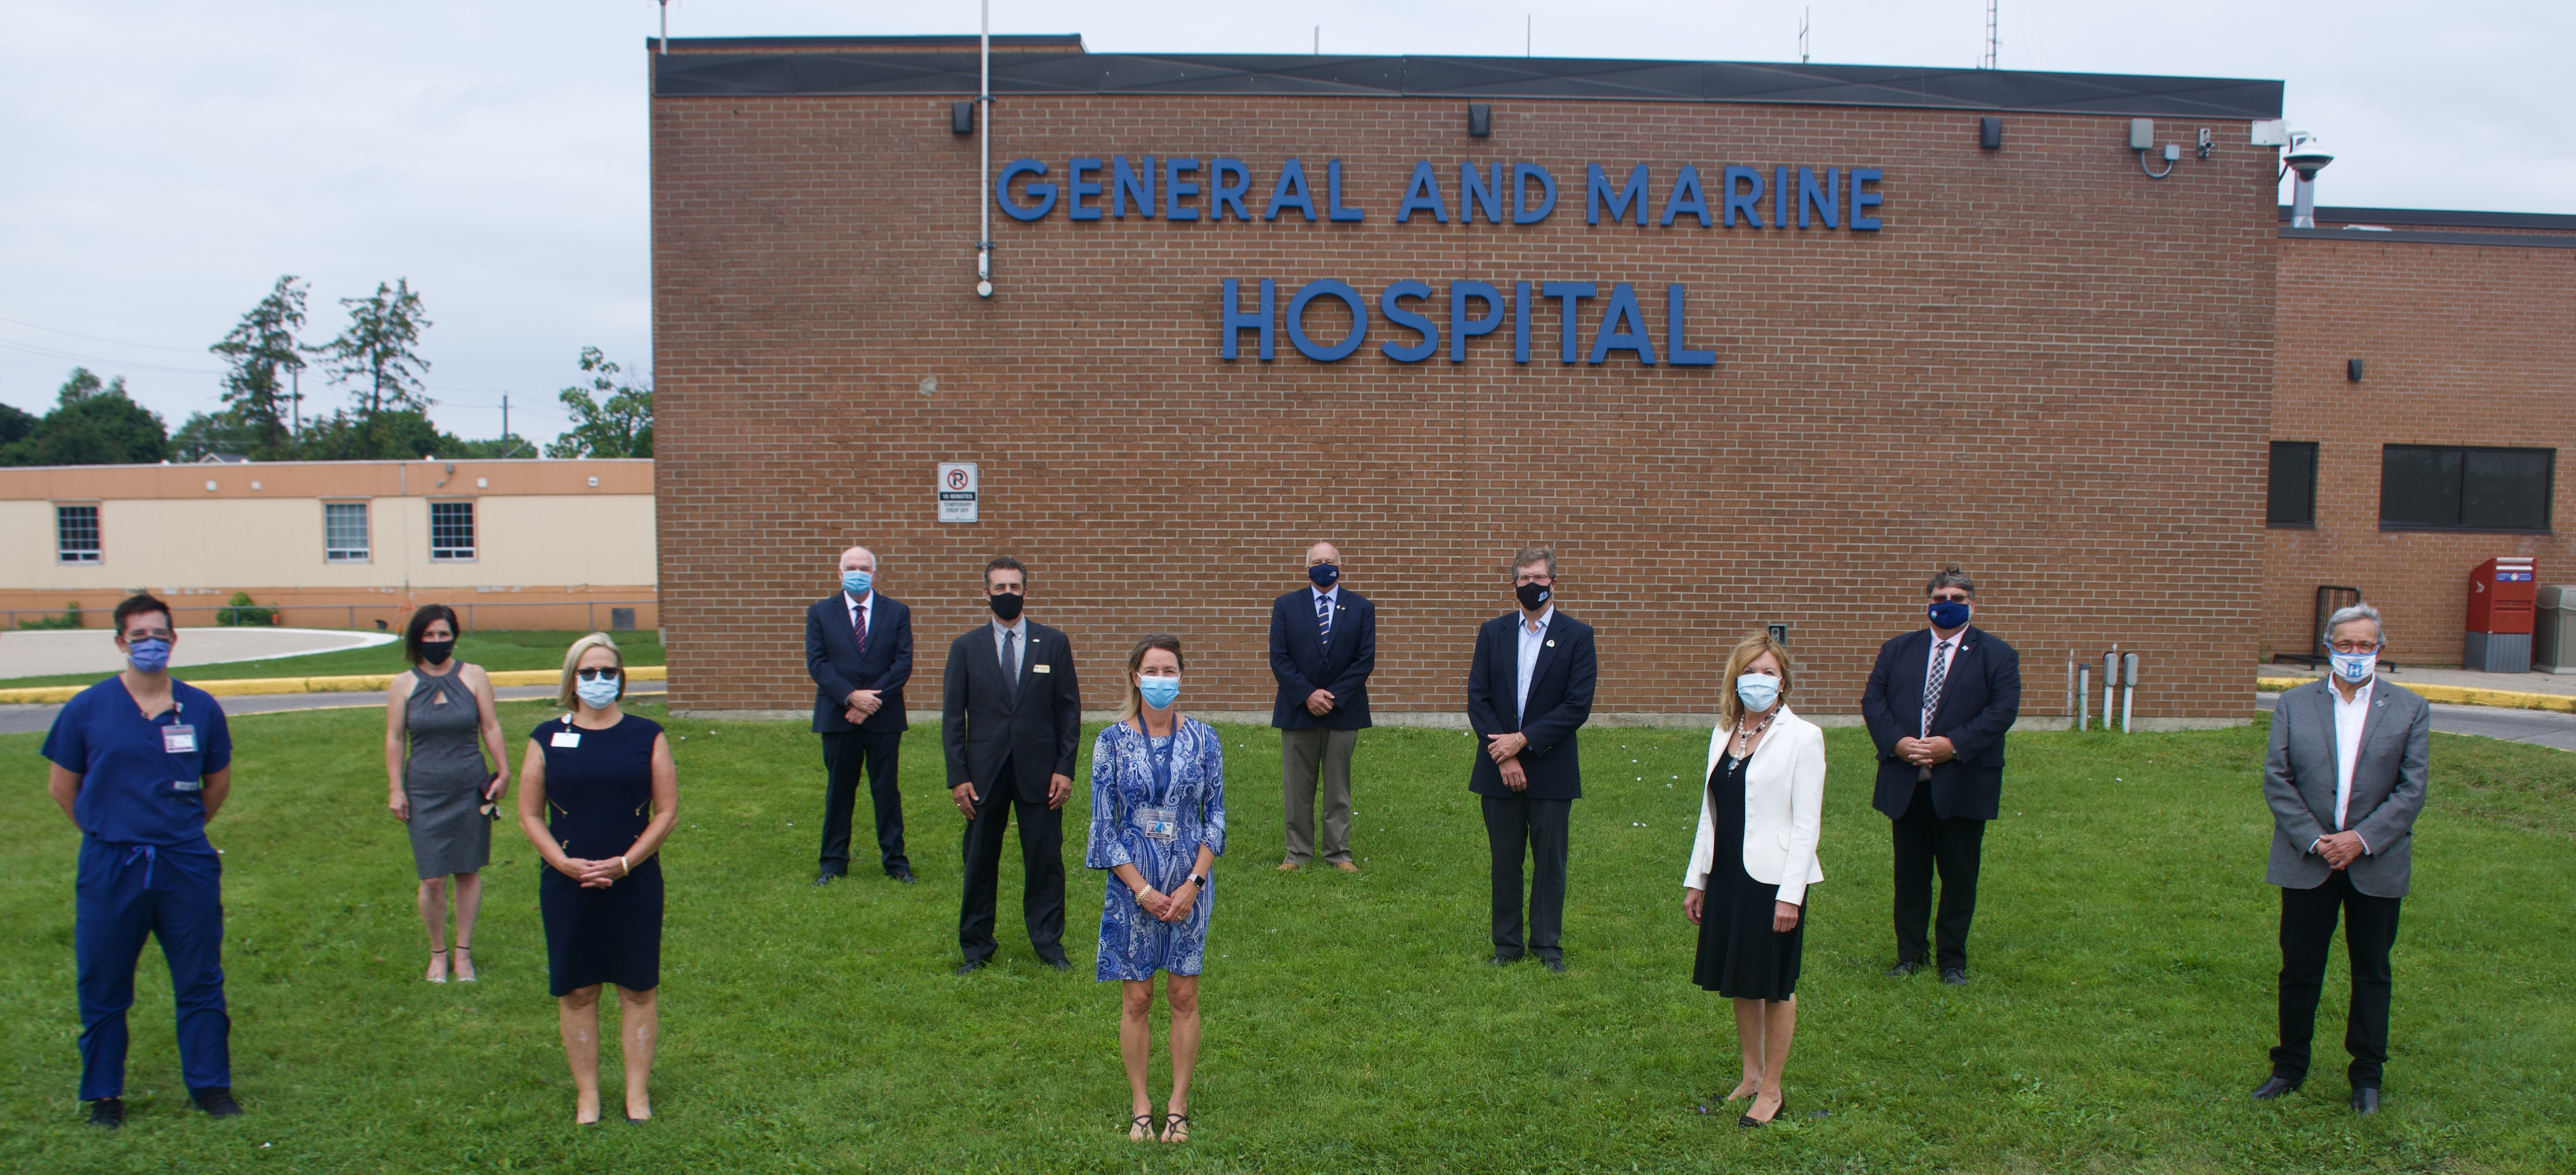 collingwood general and marine hospital reviews